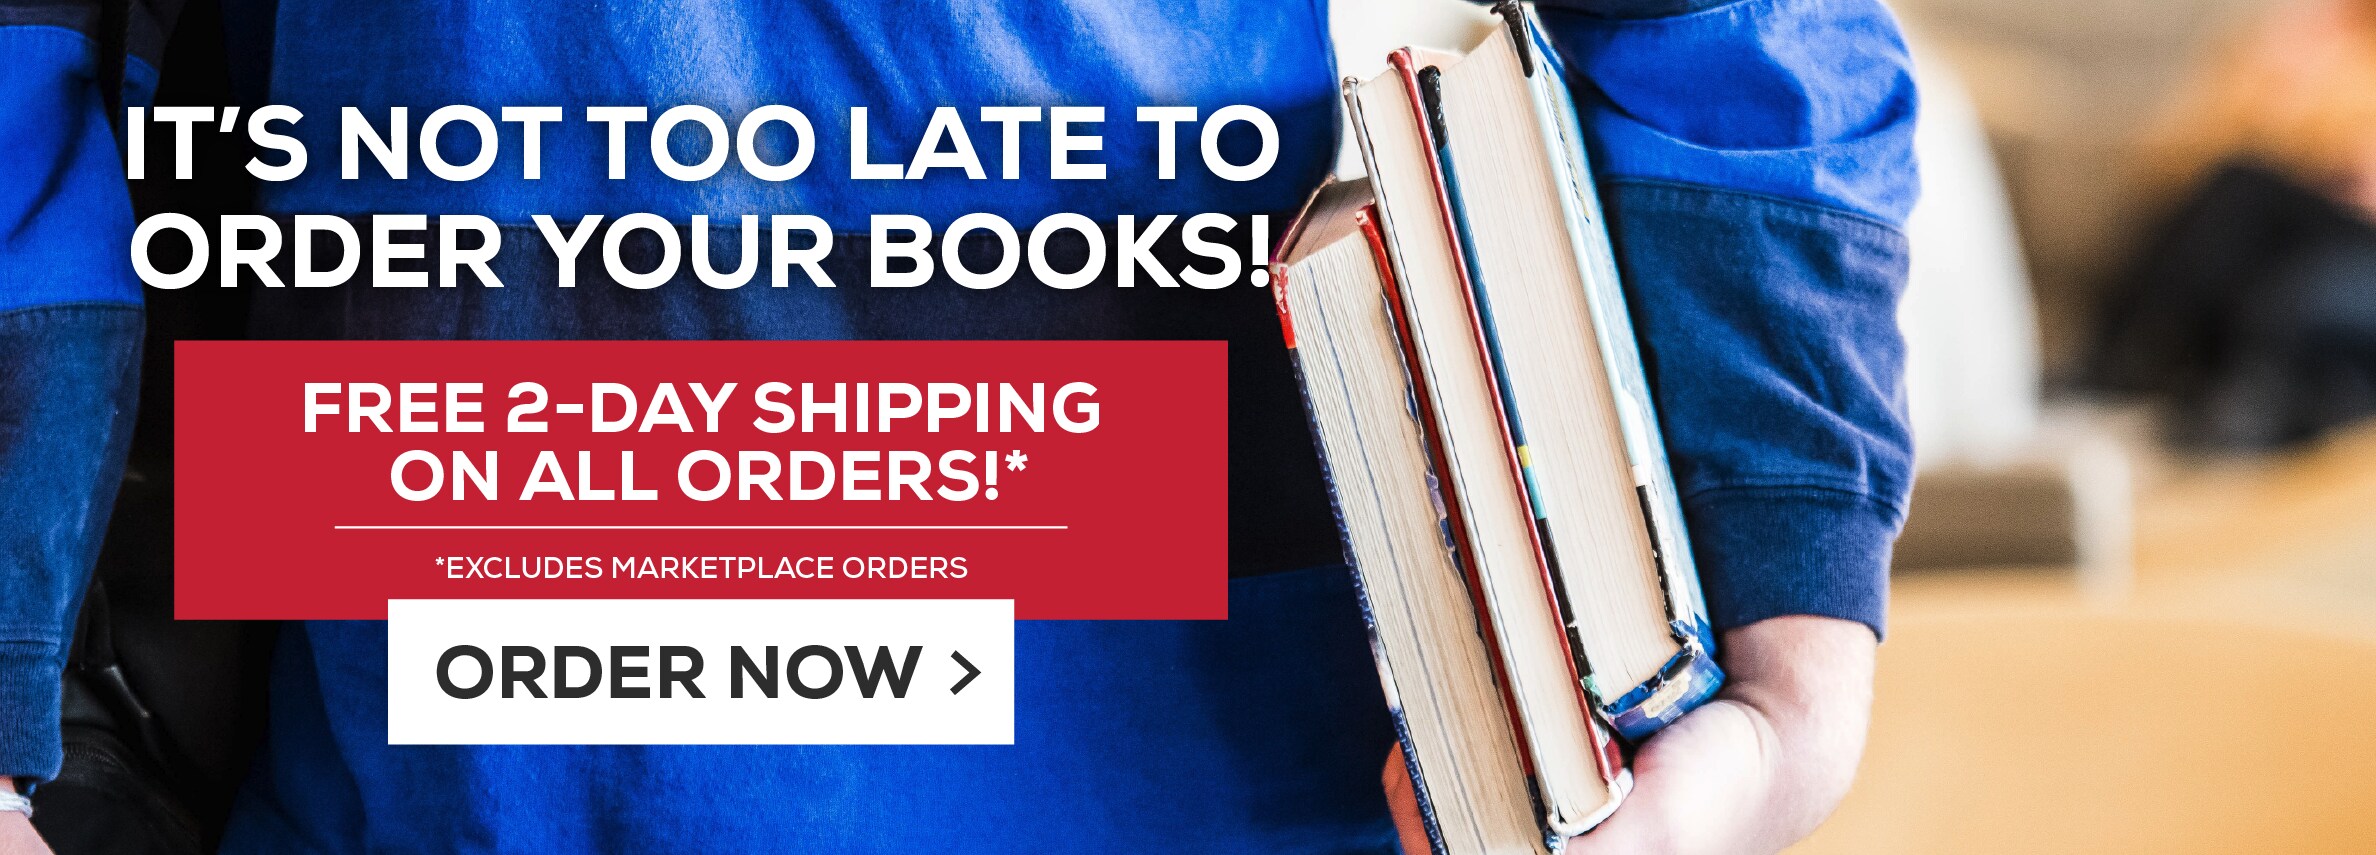 IT'S NOT TOO LATE TO ORDER YOUR BOOKS! FREE 2-DAY SHIPPING ON ALL ORDERS!* *EXCLUDES MARKETPLACE ORDERS ORDER NOW >